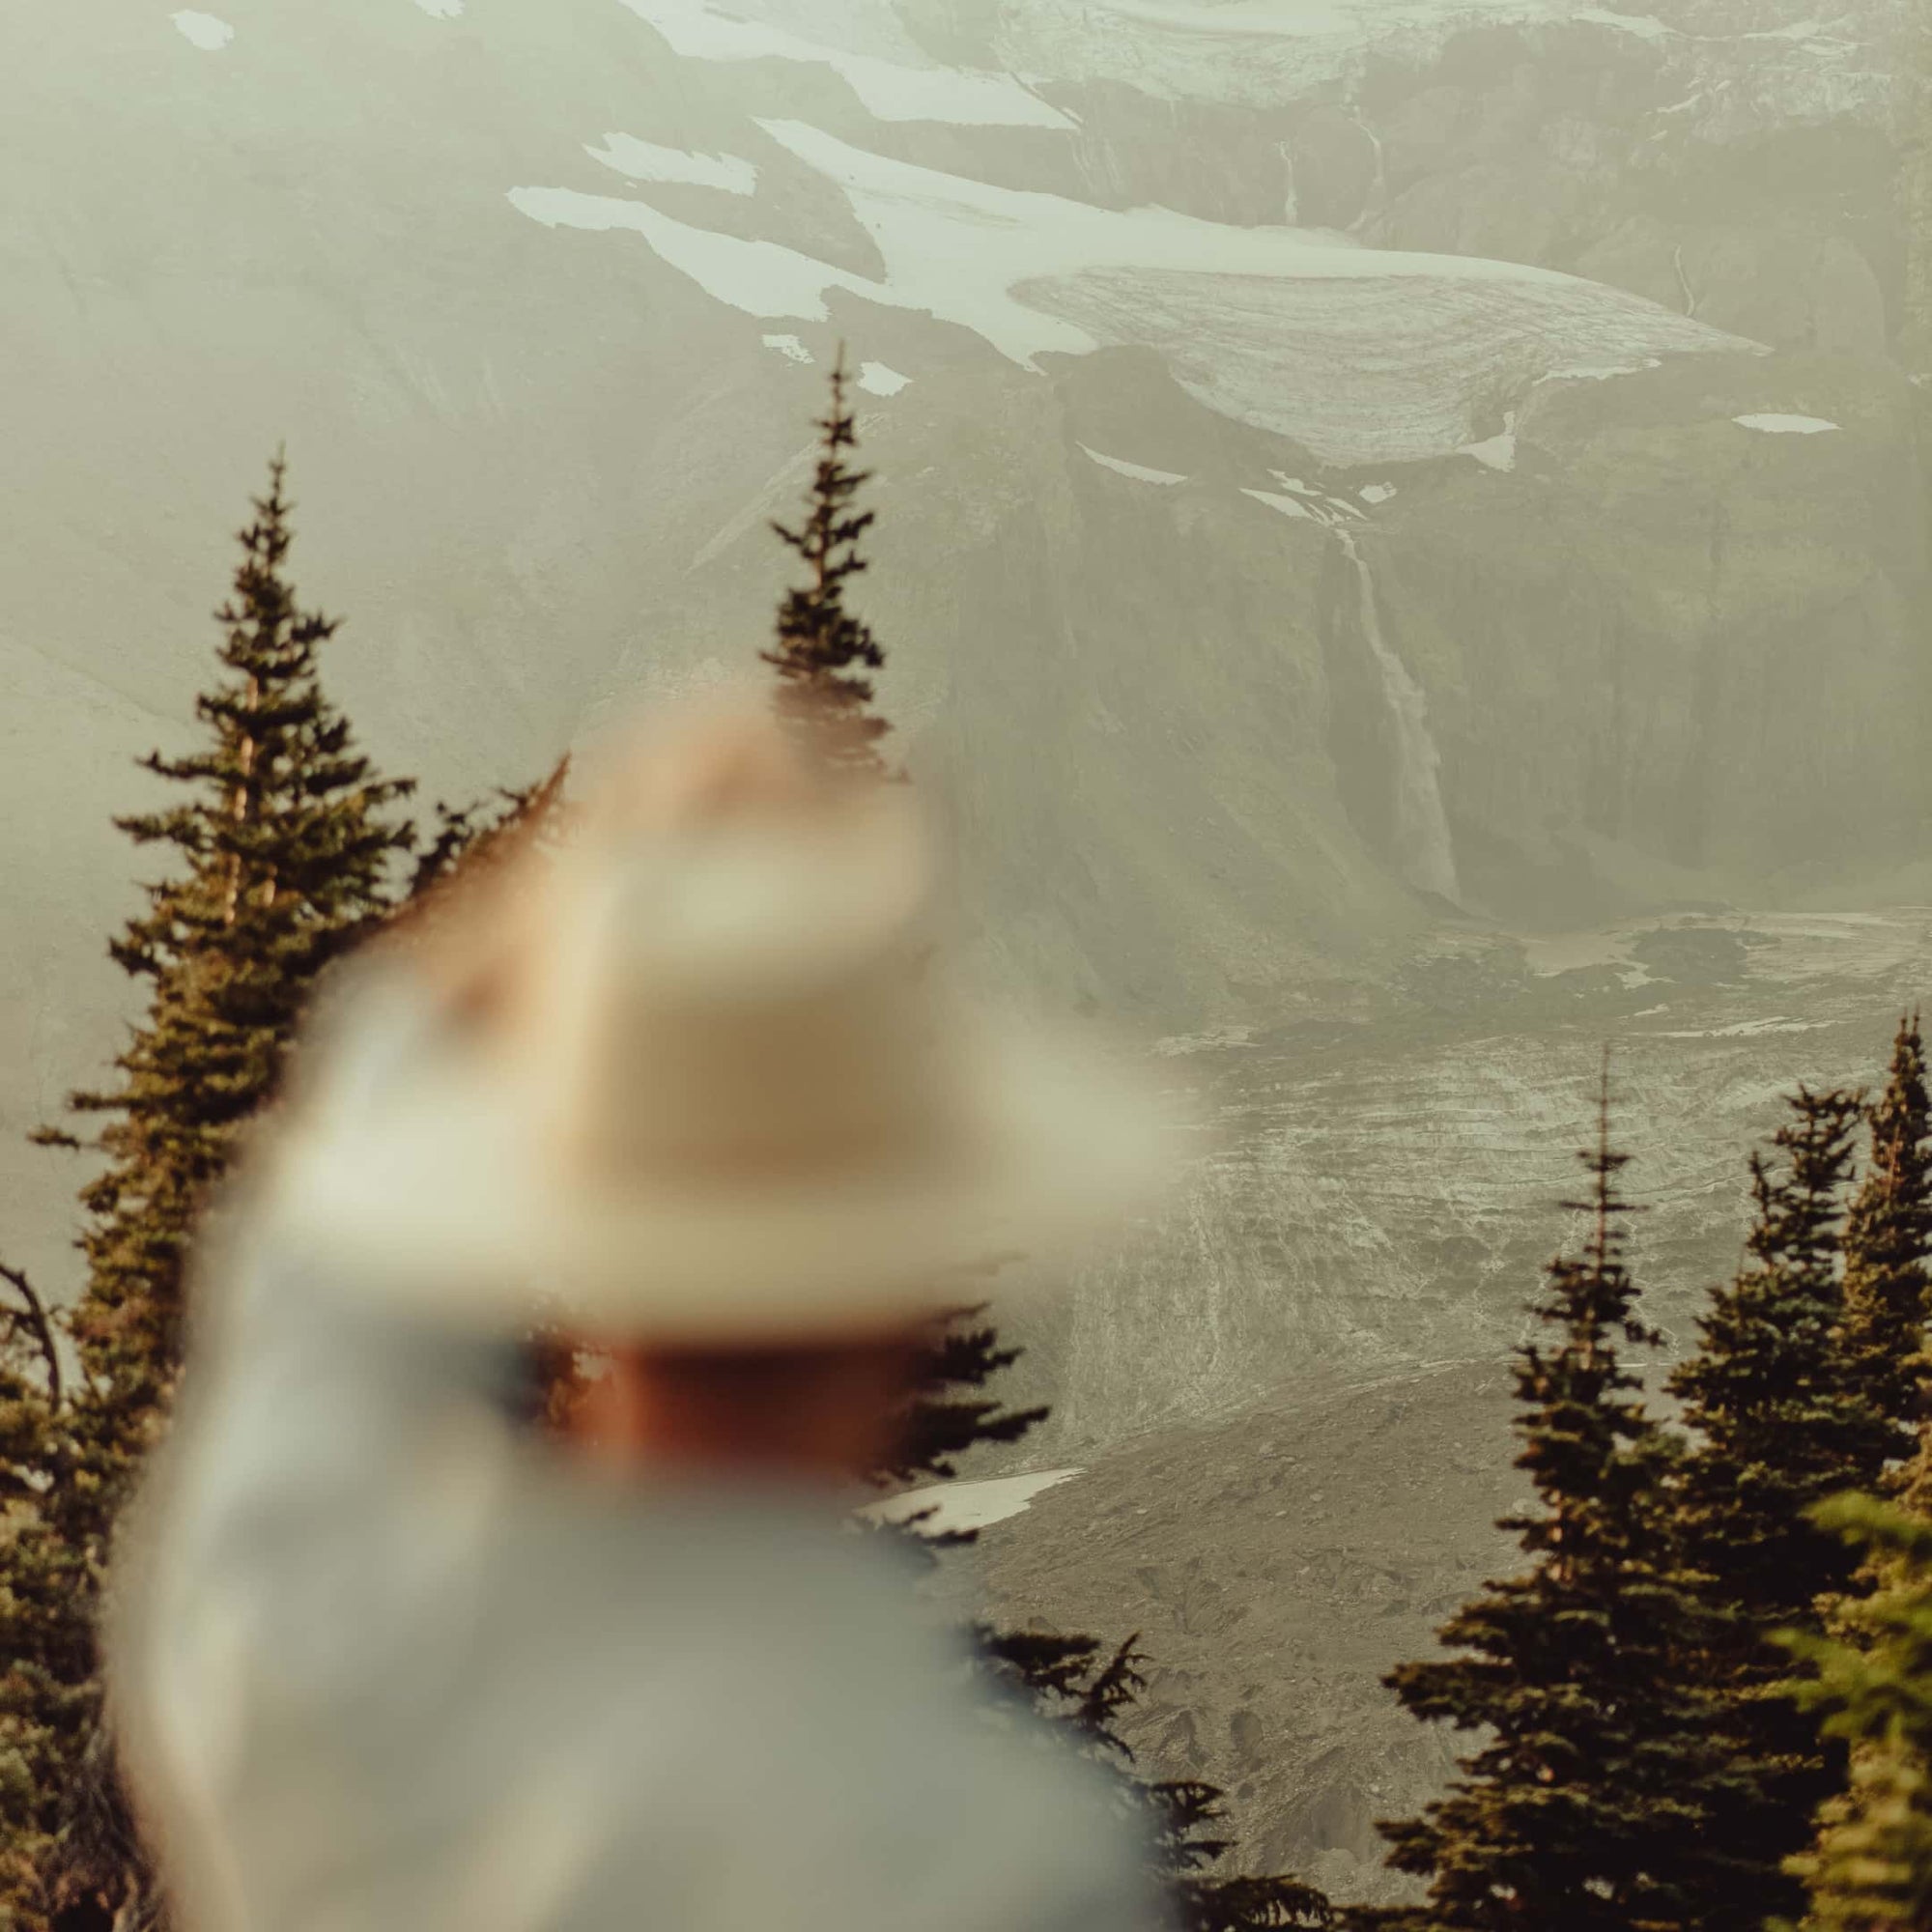 A man looks over at a scene of gorgeous mountain views